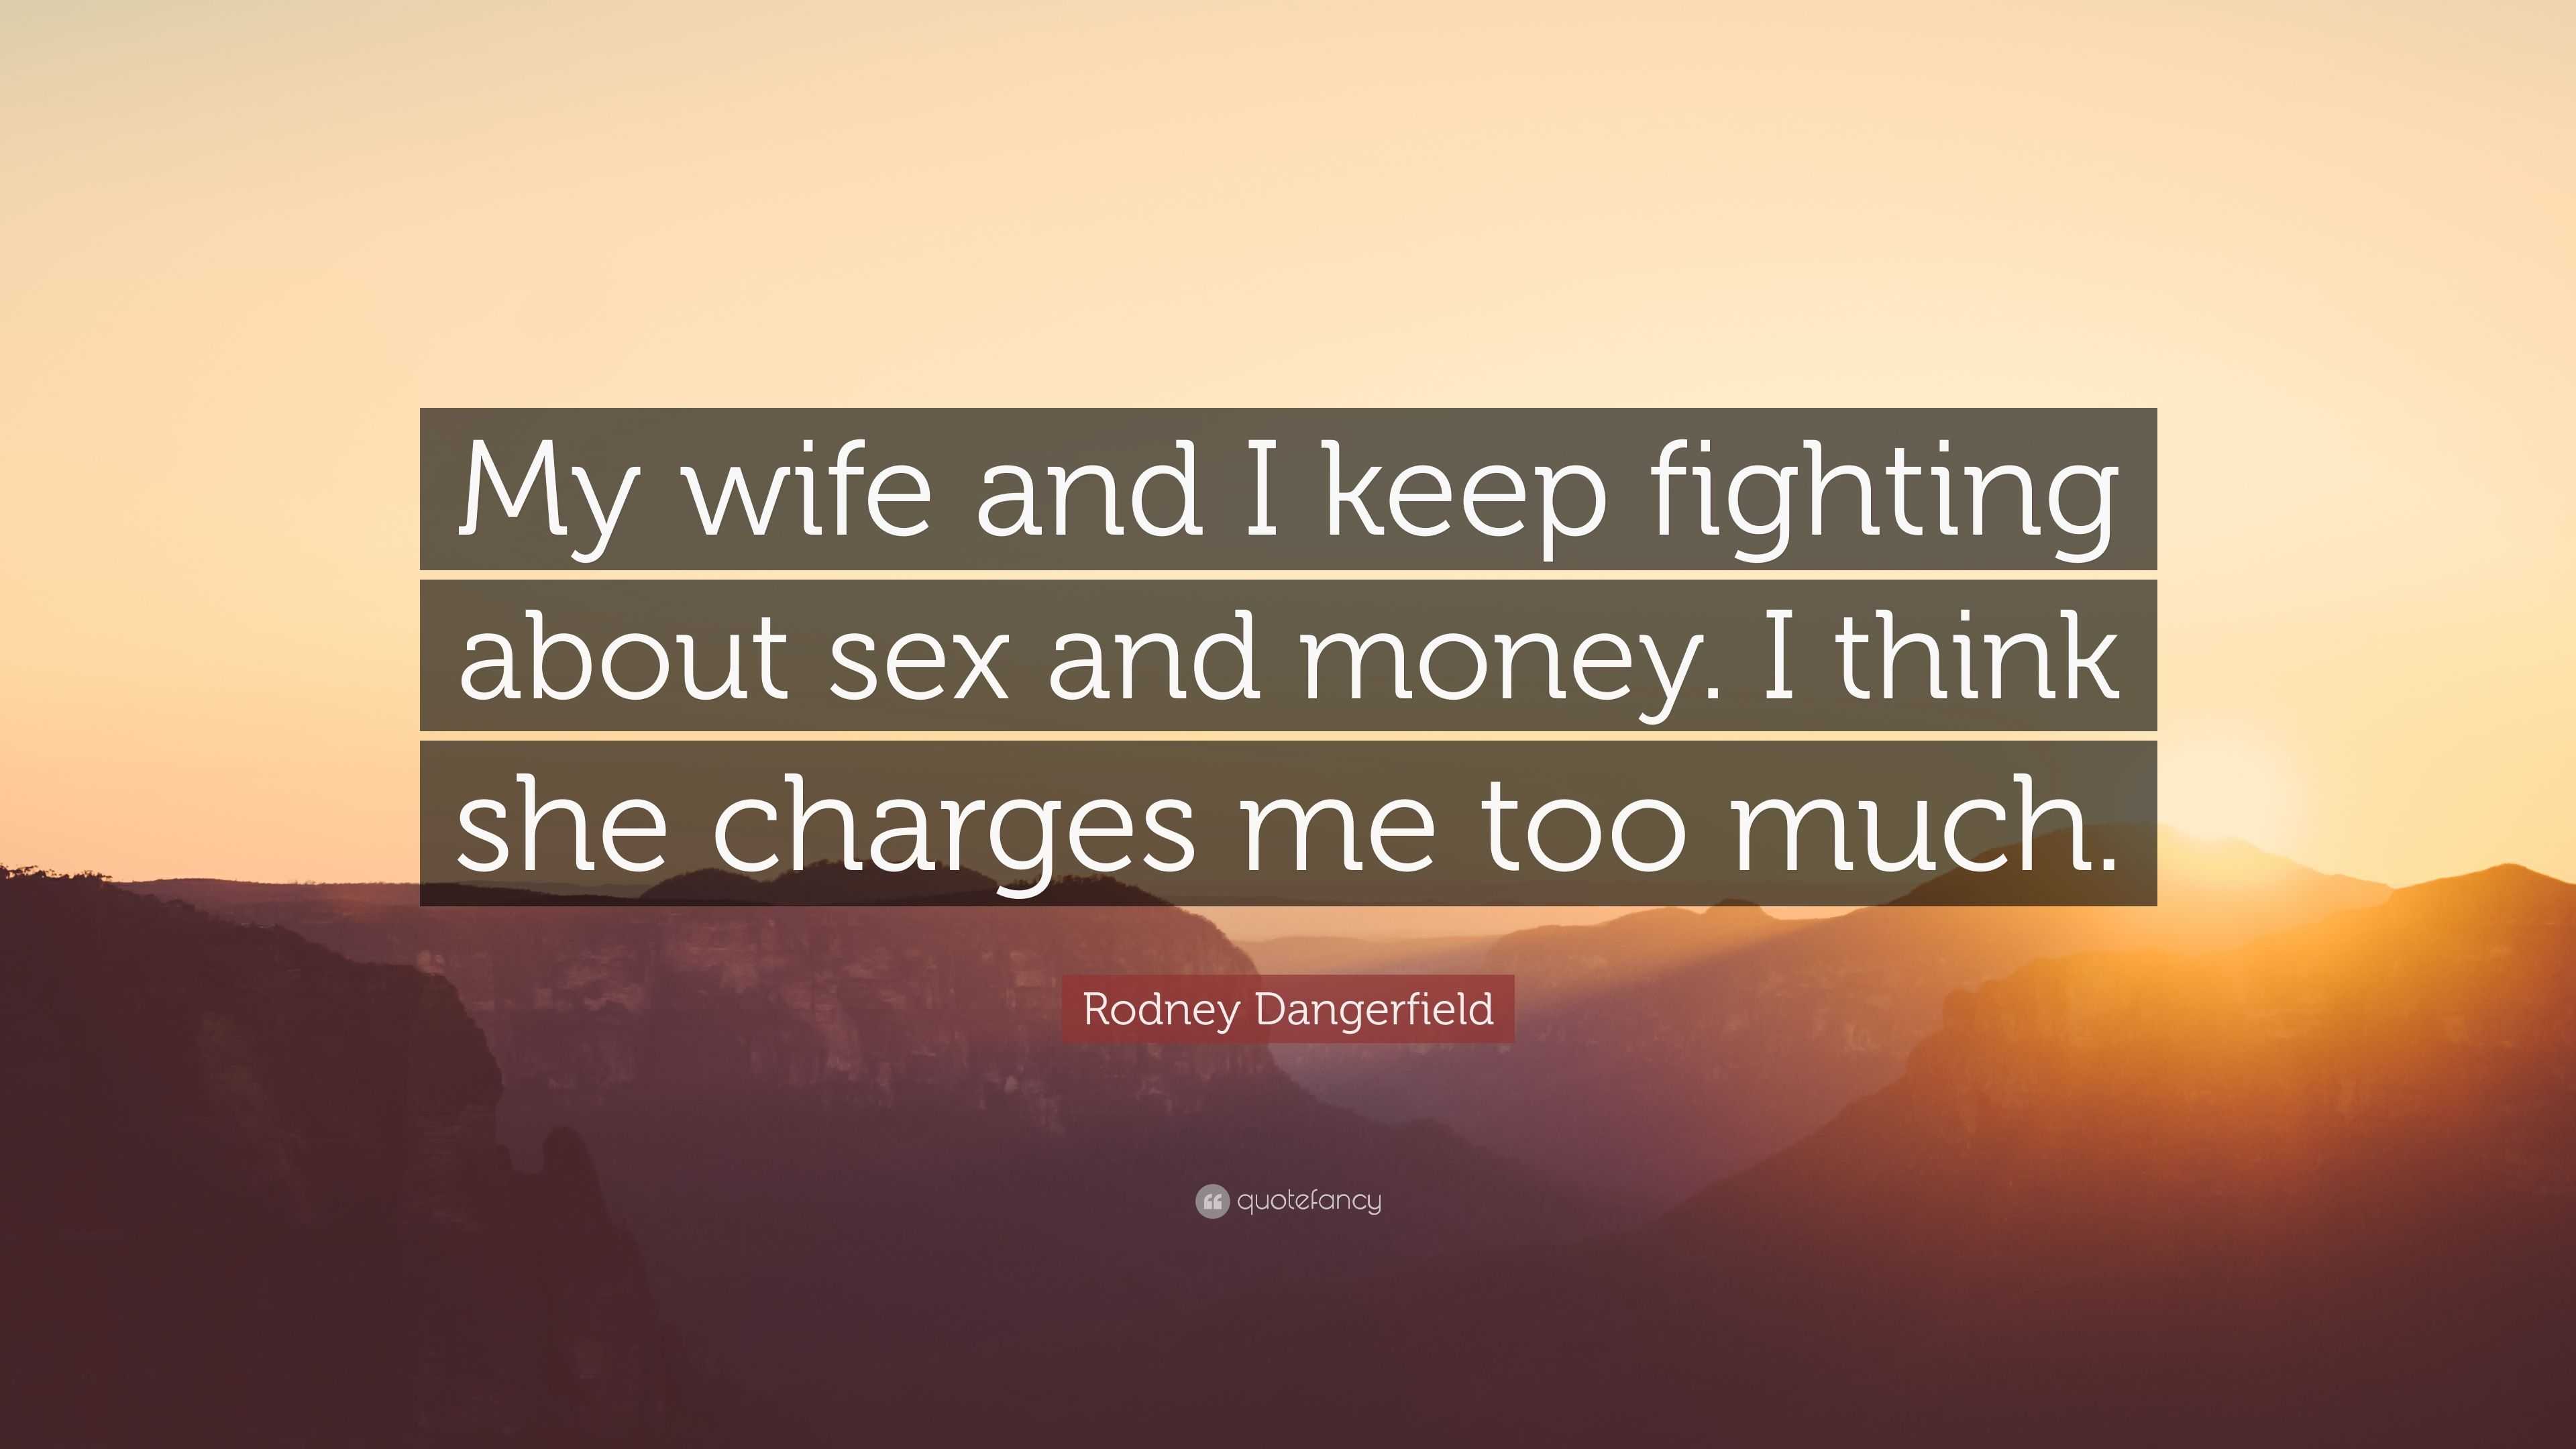 Rodney Dangerfield Quote “My wife and I keep fighting about sex and money photo